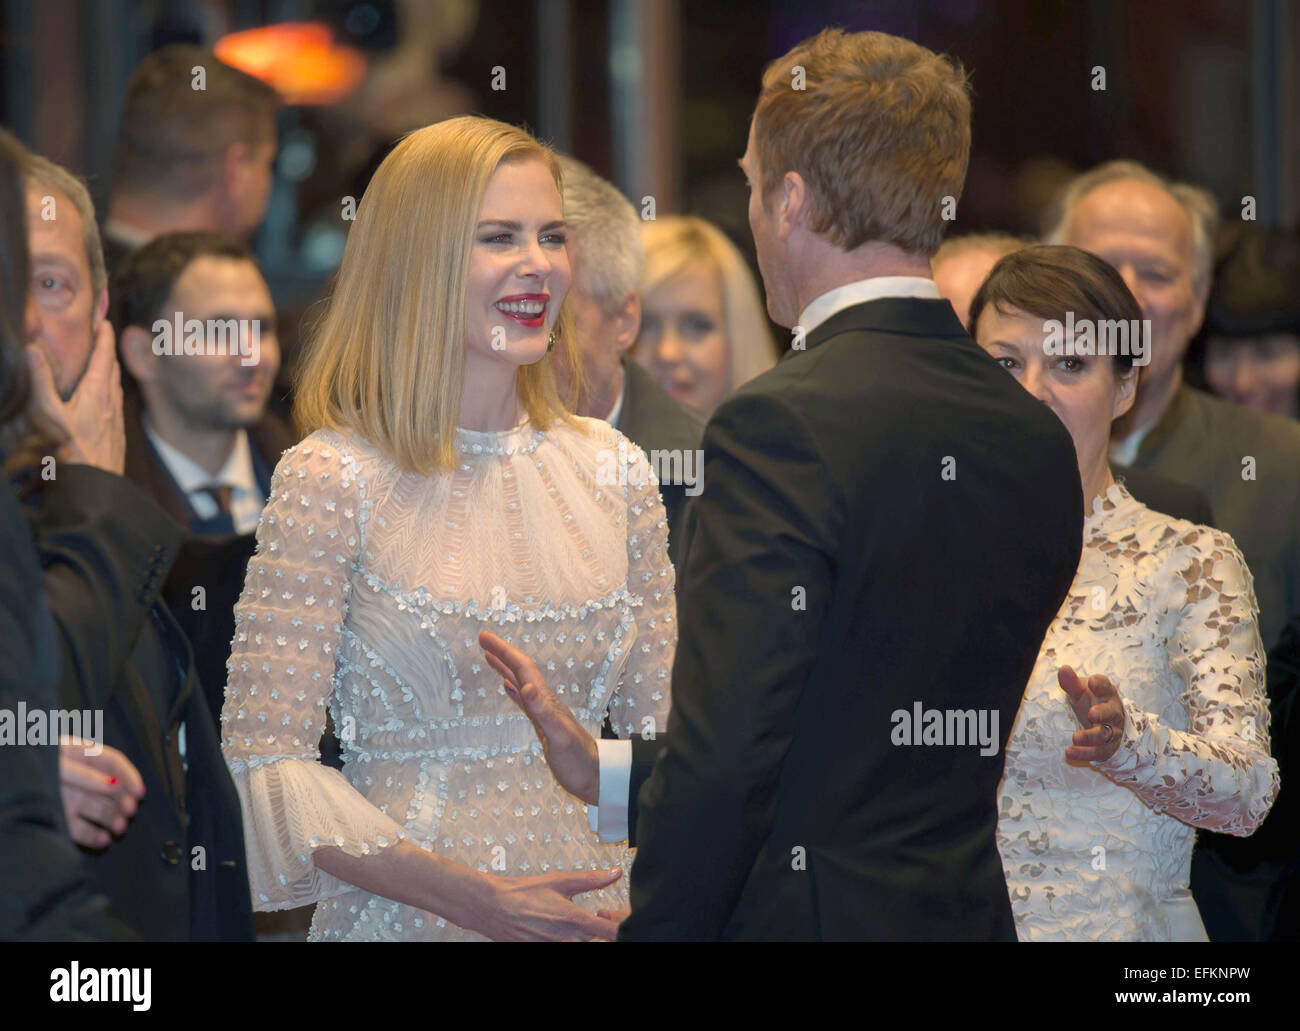 Berlin, Germany. 06th Feb, 2015. Australian actress Nicole Kidman and British actor Damian Lewis arrive for the screening of 'Queen of the Desert' during the 65th annual Berlin Film Festival, in Berlin, Germany, 06 February 2015. The movie is presented in the Official Competition of the Berlinale, which runs from 05 to 15 February 2015. PHOTO: TIM BRAKEMEIER/dpa/Alamy Live News Stock Photo